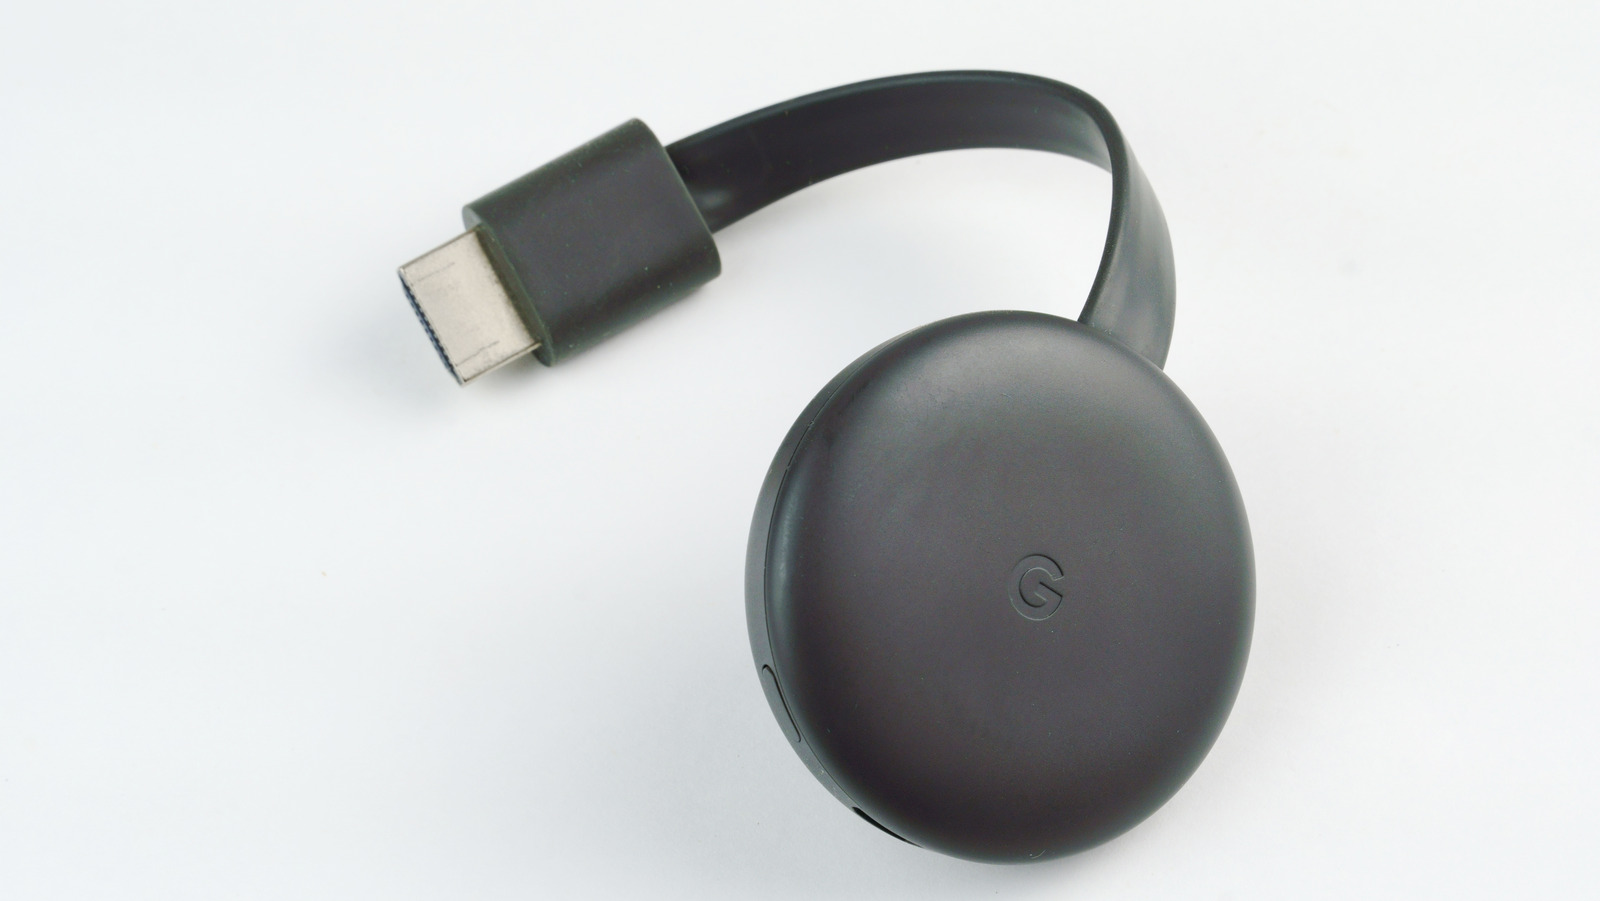 Chromecast Is Google's Miracle Device